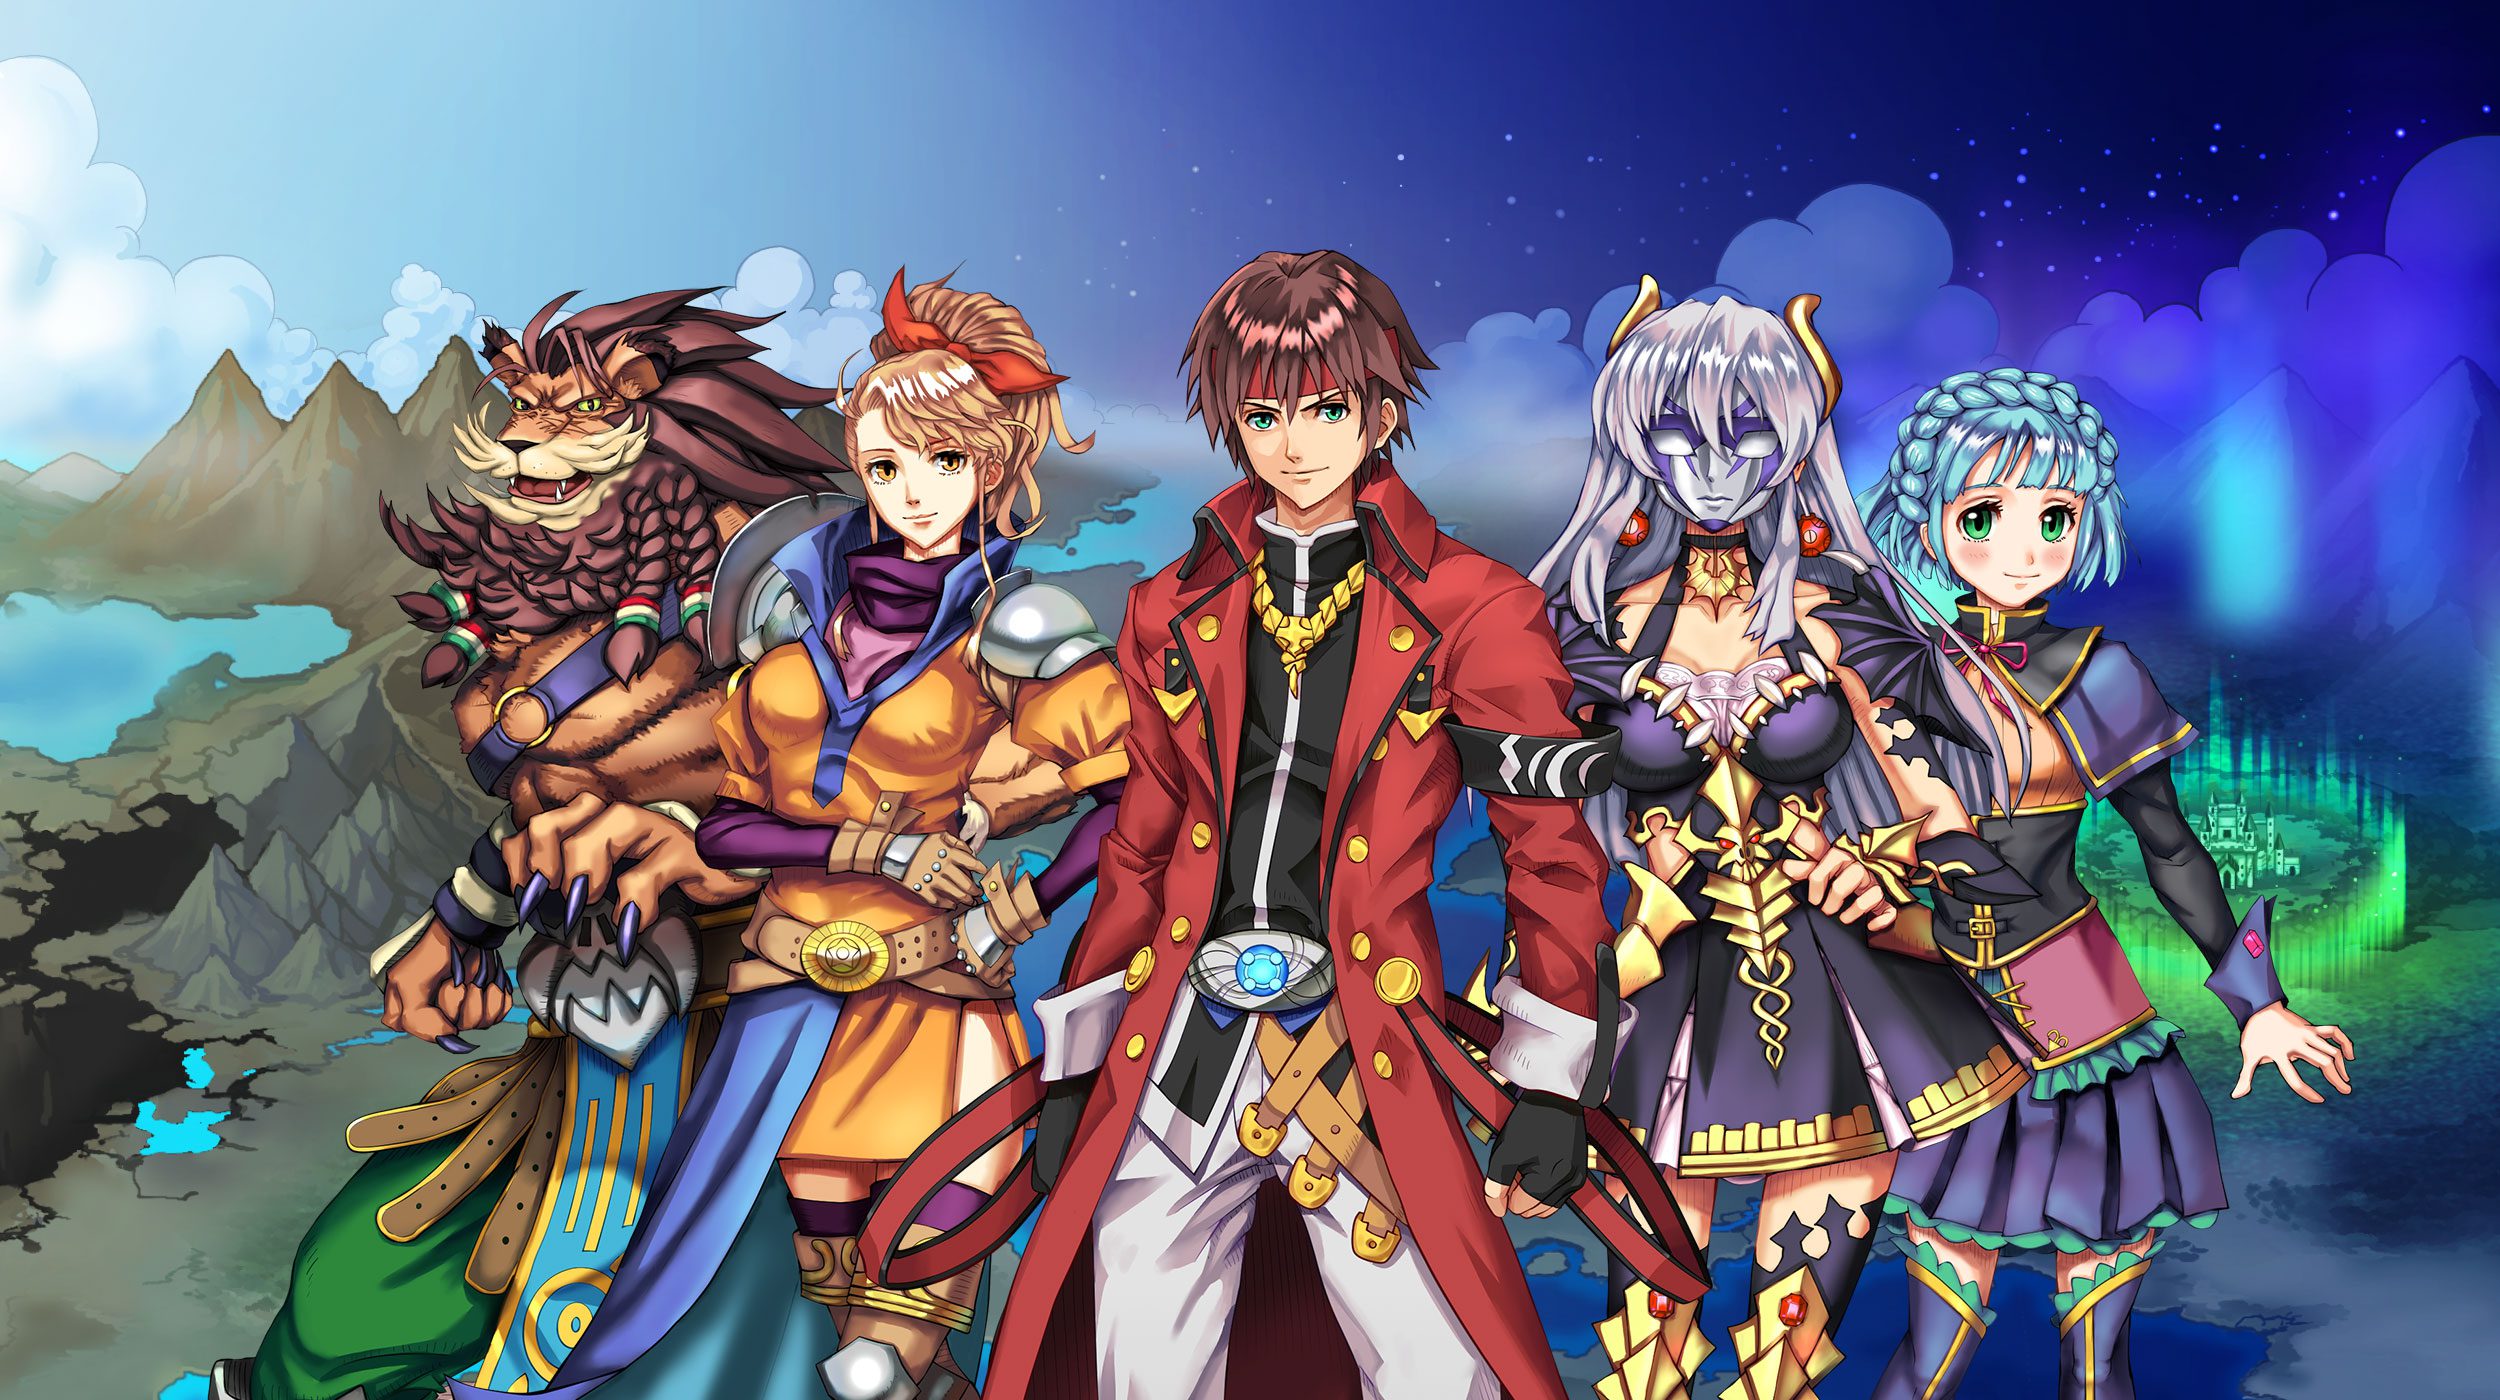 KEMCO brings ‘Revenant Dogma’ to Xbox One and Windows 10 September 12th